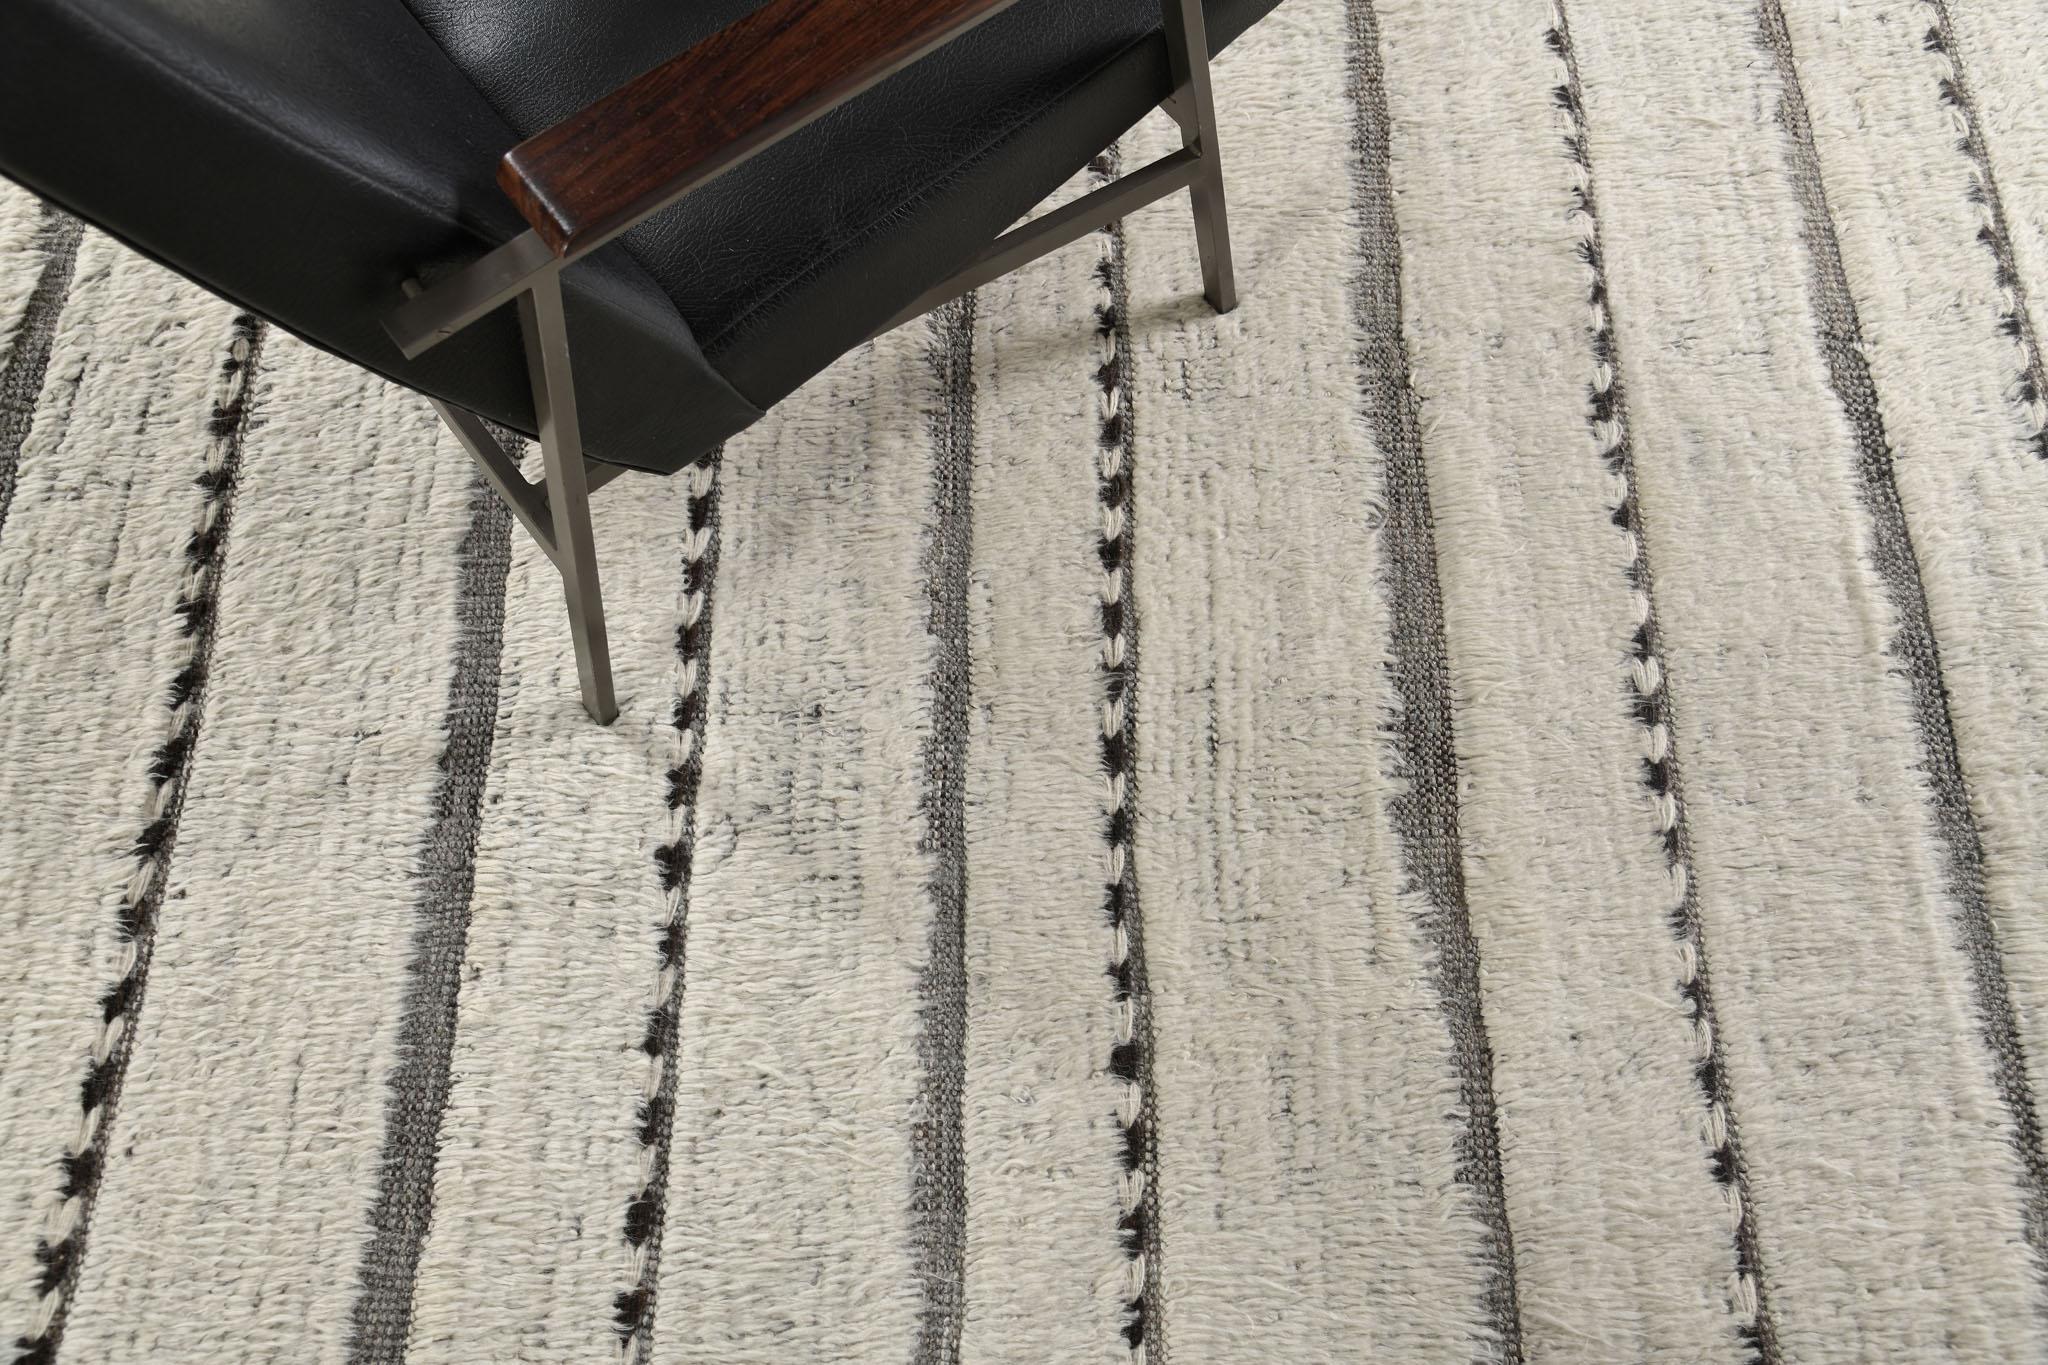 Abrolhos is a handwoven luxurious wool rug with timeless embossed detailing. In addition to its perfect brown flatweave, Albrohos has a beautiful shag that brings a lustrous texture and contemporary feel to one's space. The Haute Bohemian collection